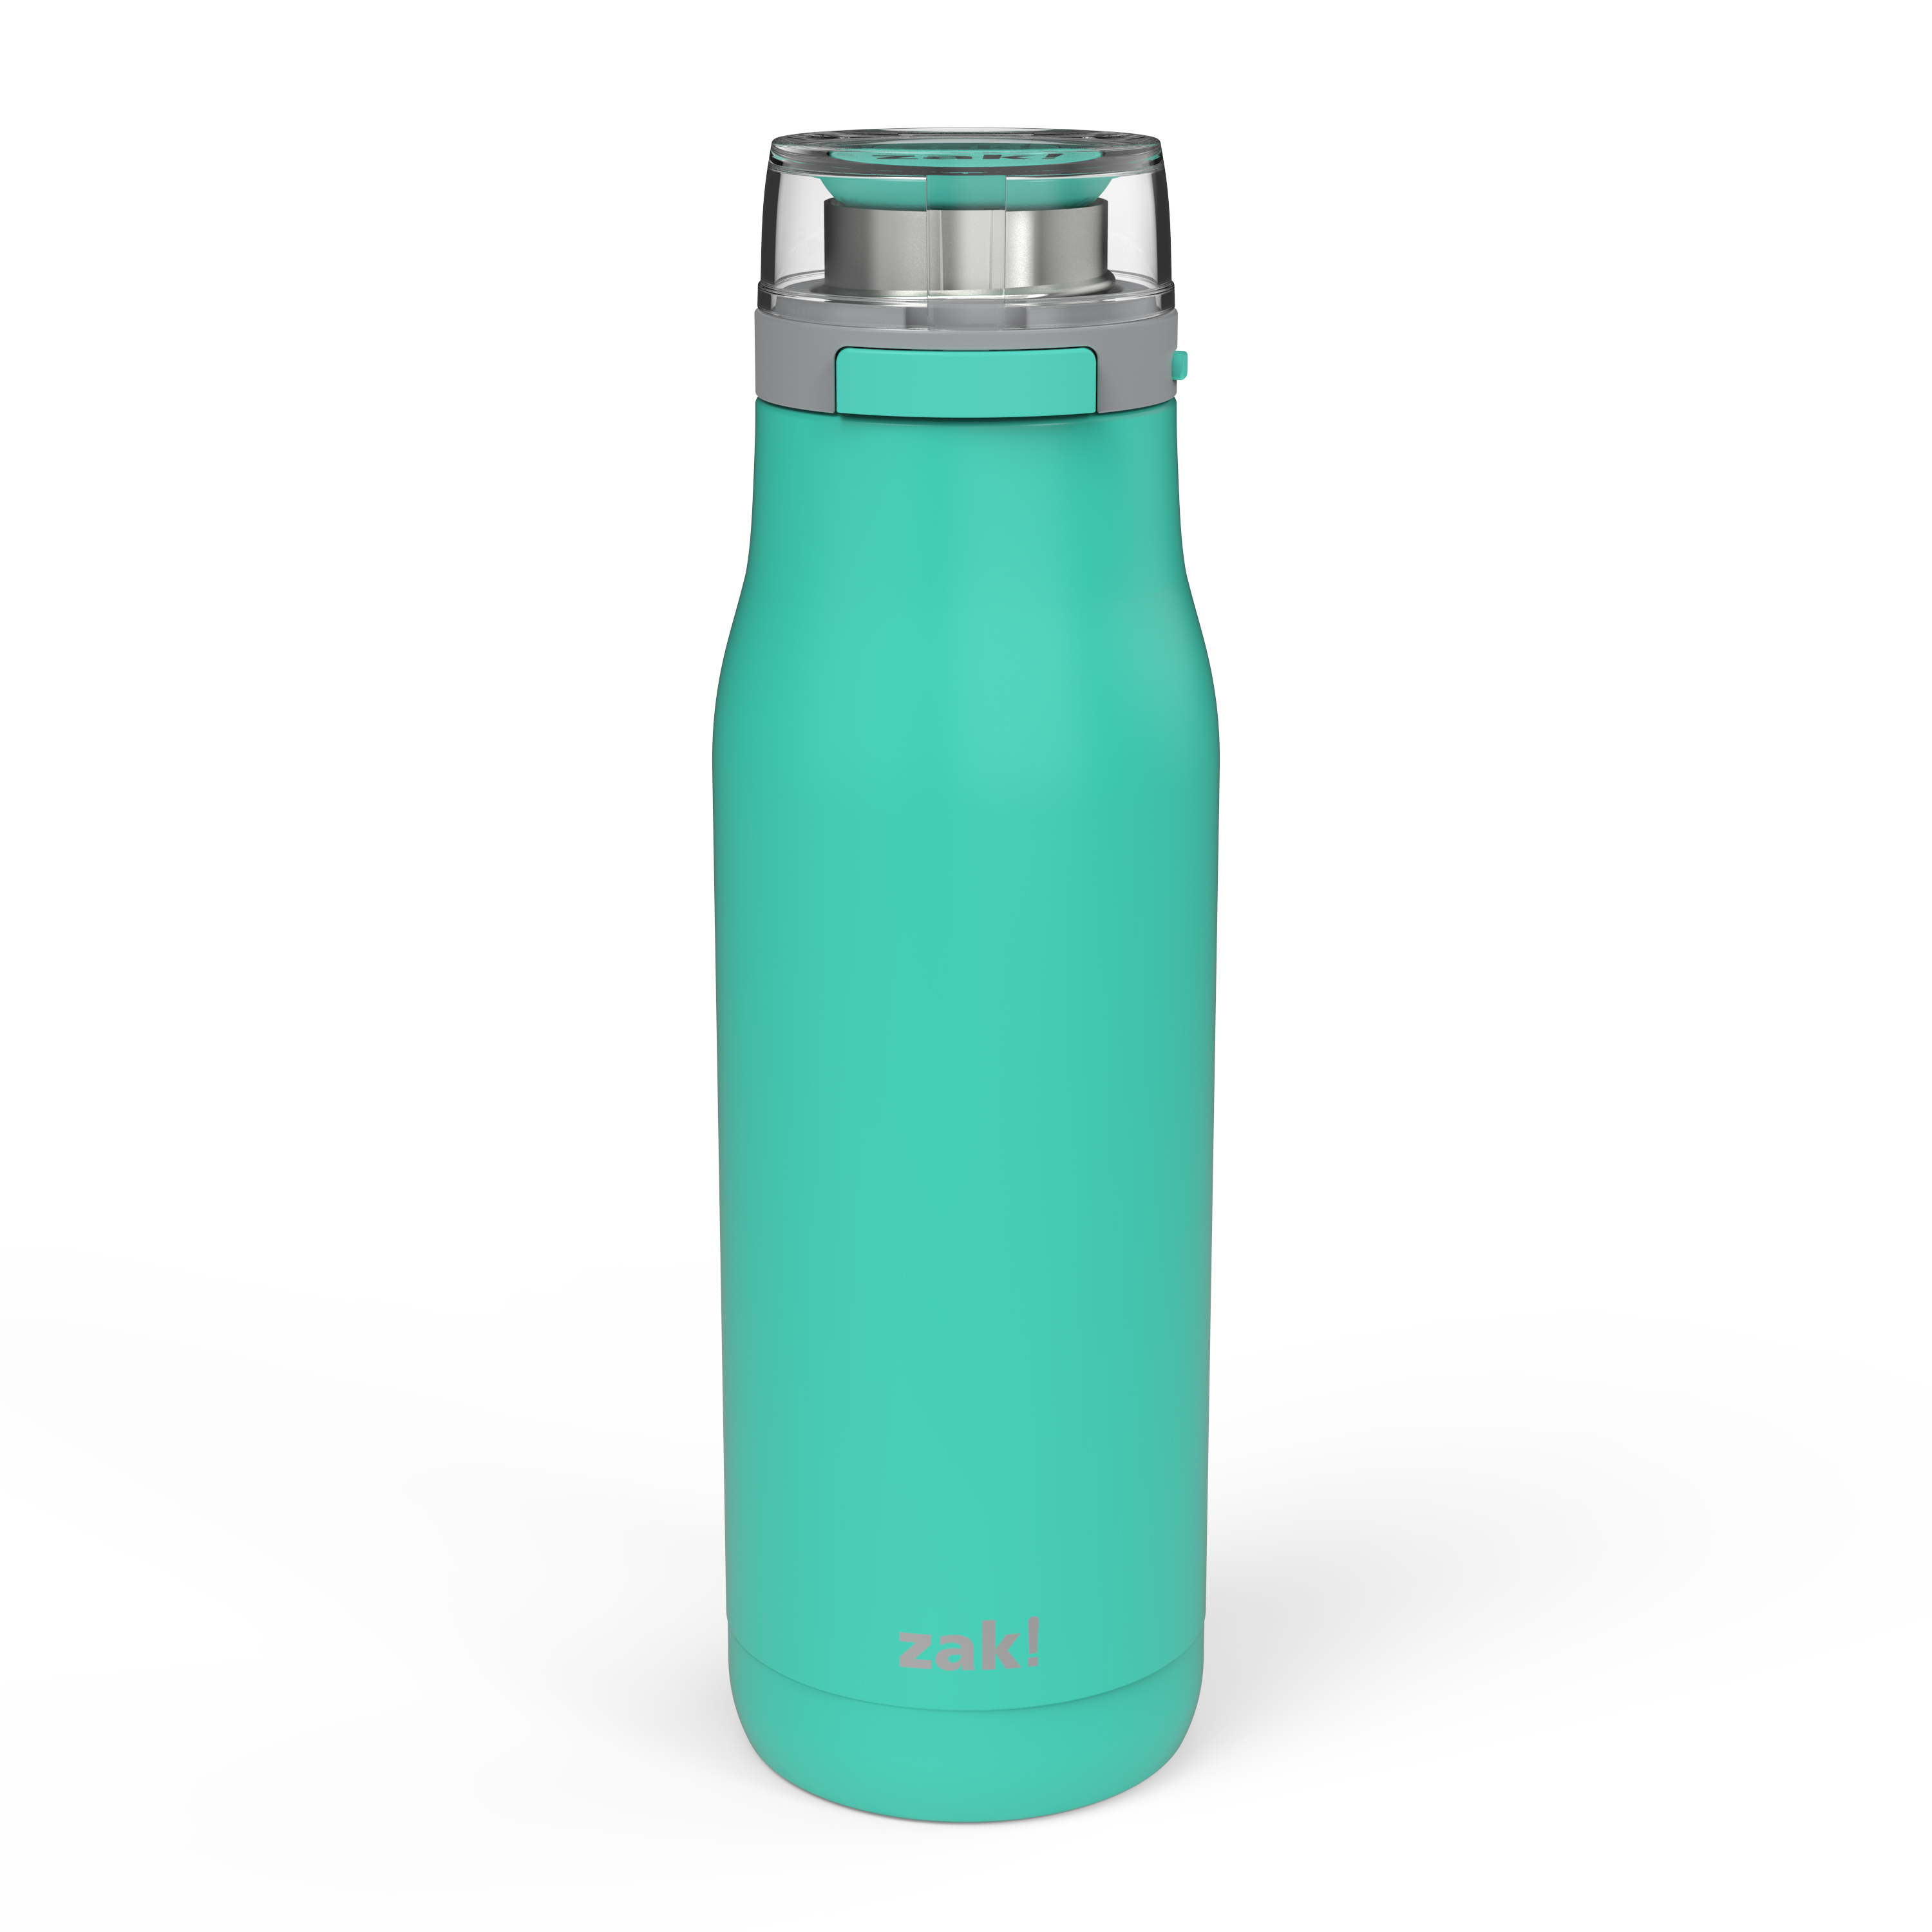 Kiona 20 ounce Vacuum Insulated Stainless Steel Tumbler, Green image